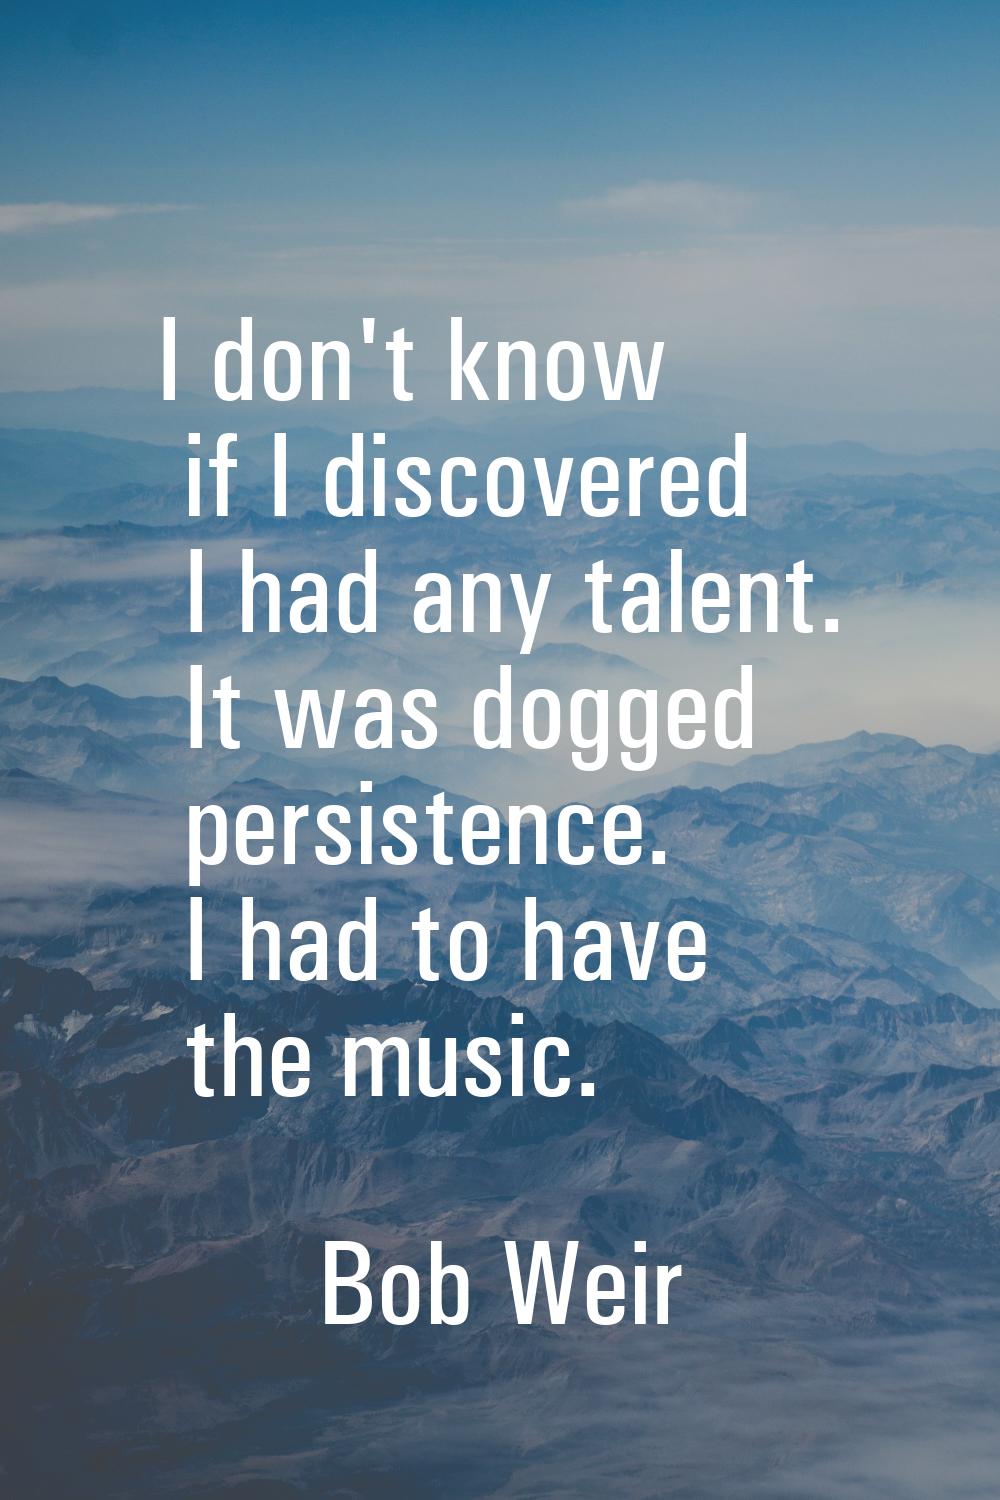 I don't know if I discovered I had any talent. It was dogged persistence. I had to have the music.